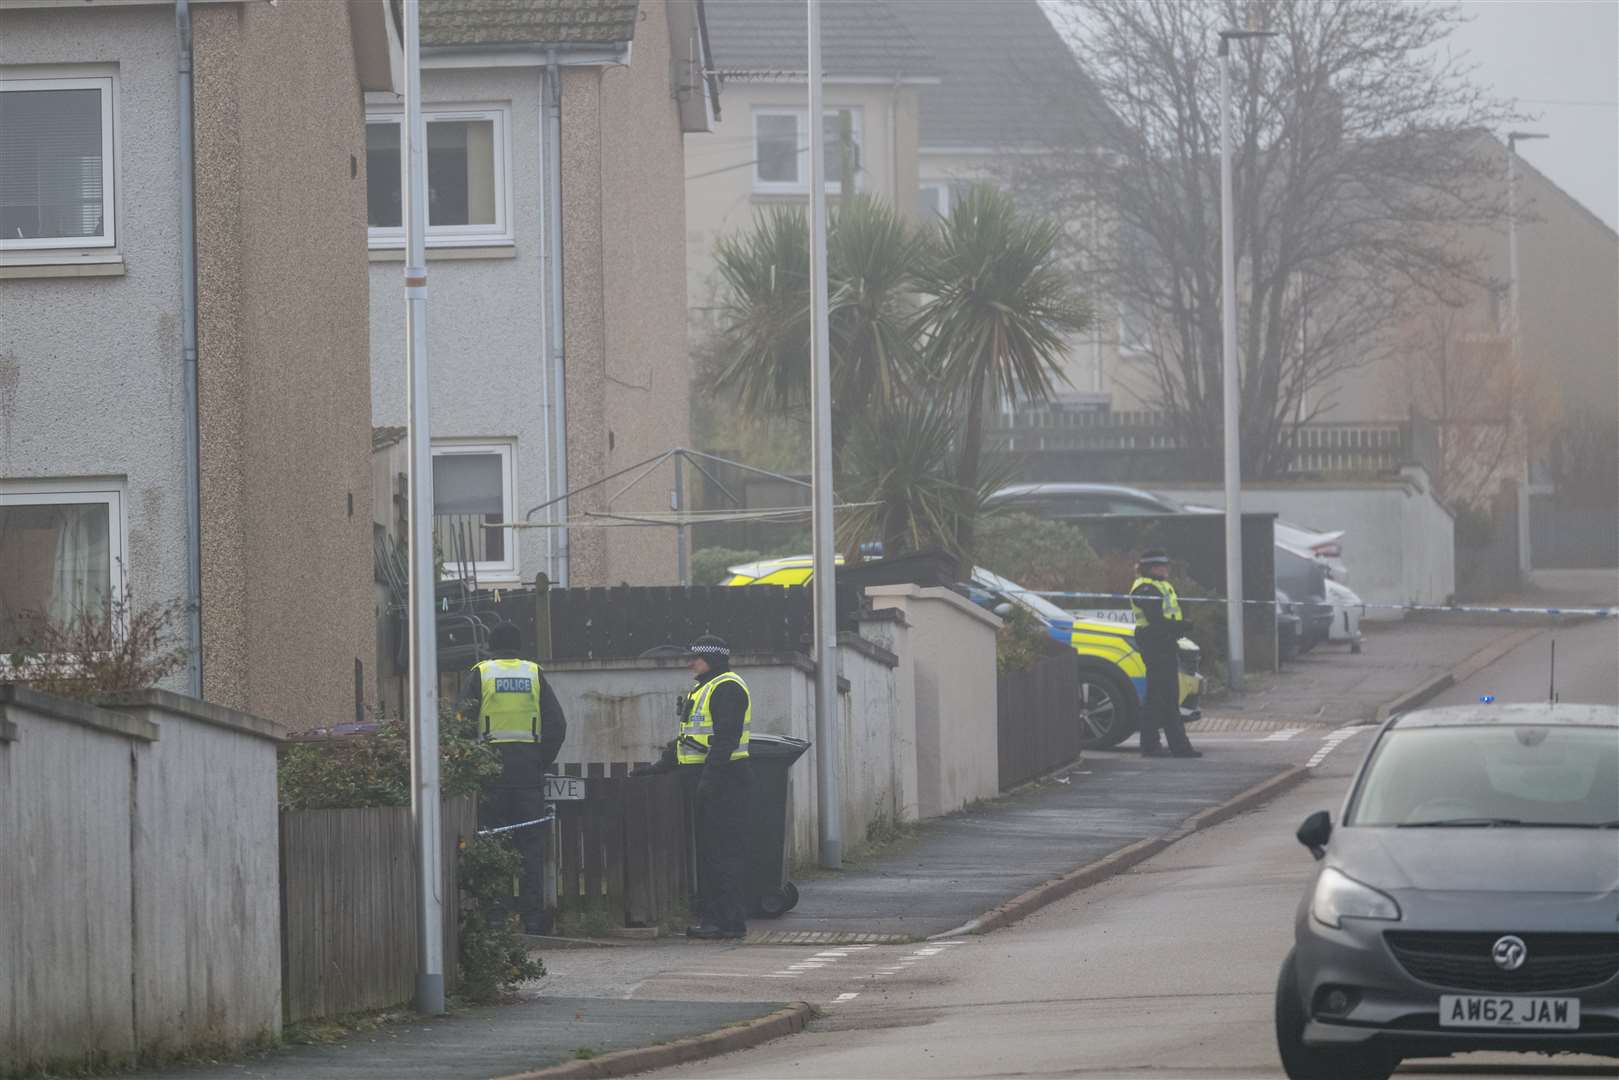 Officers at the scene of the murder investigation in Elgin. Picture: Jasperimage